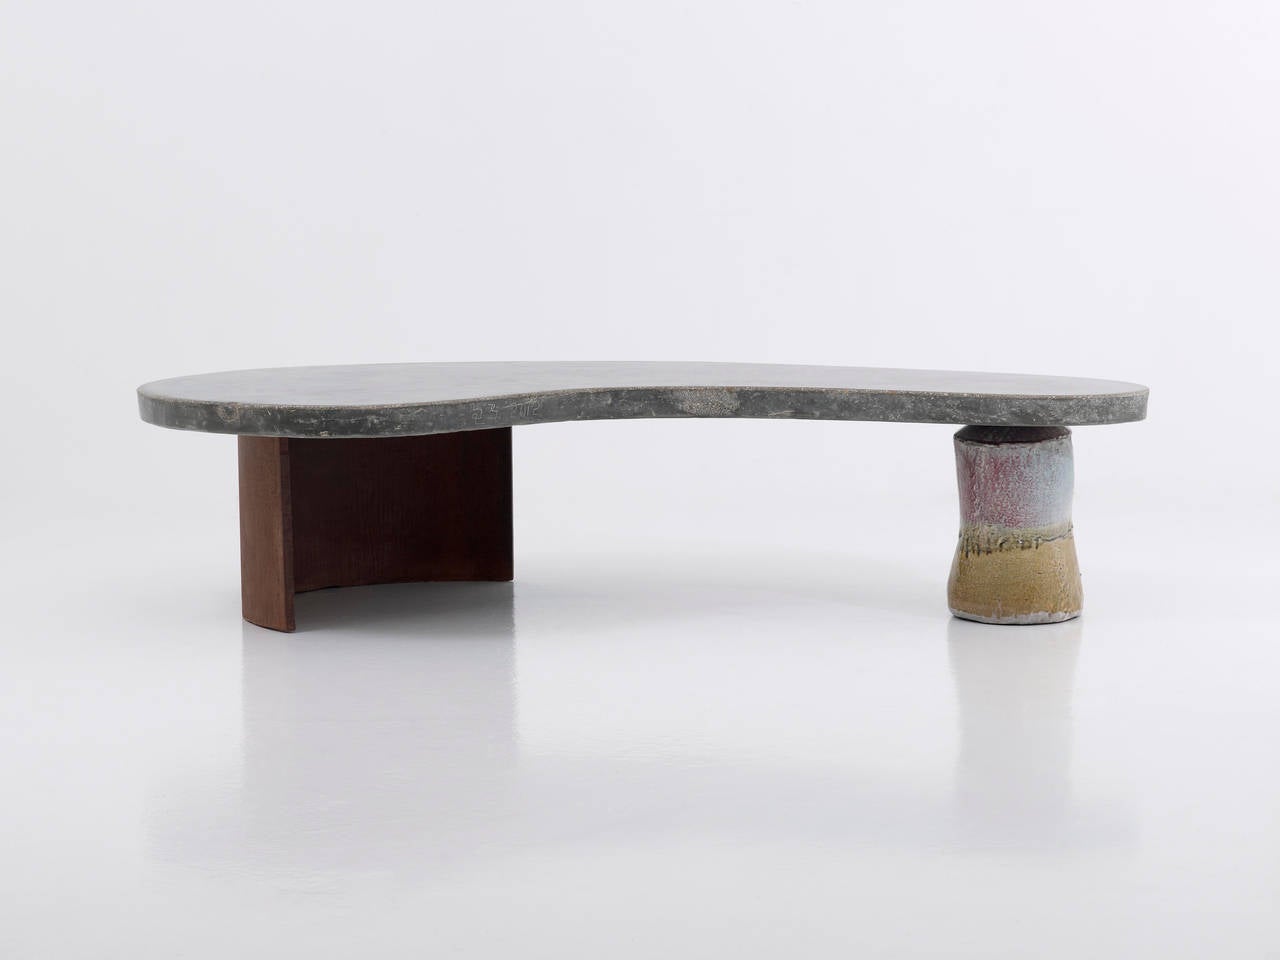 Contemporary Organic Lined Concrete Bench by Lee Hun Chung, 2012 For Sale